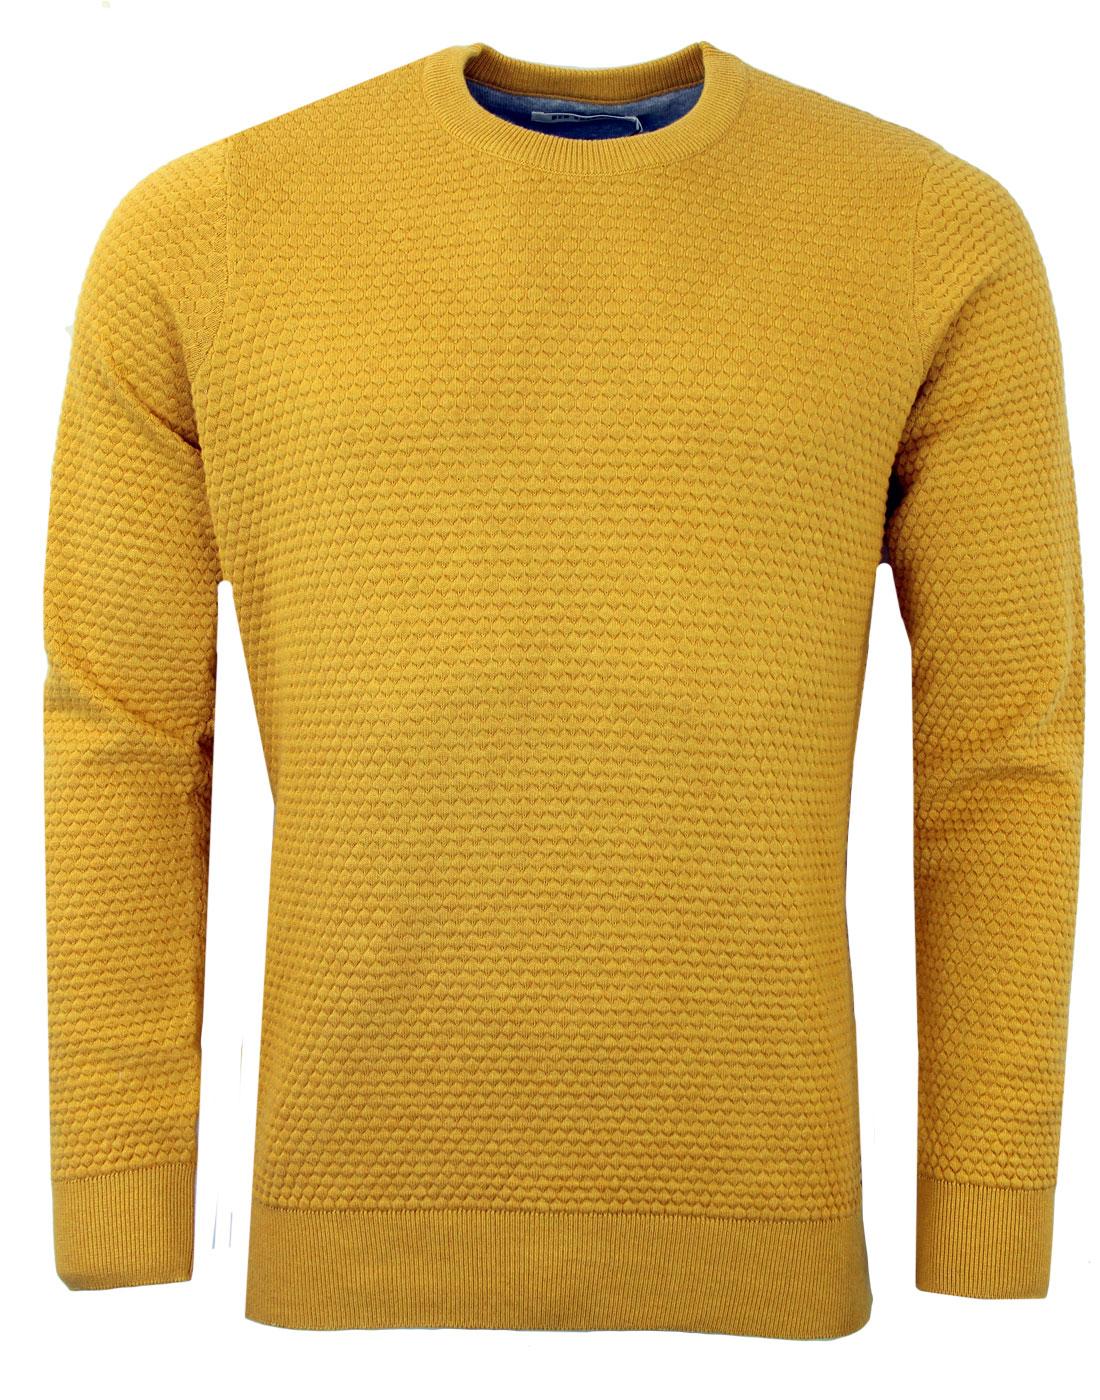 Basic crew neck structured knit sweater